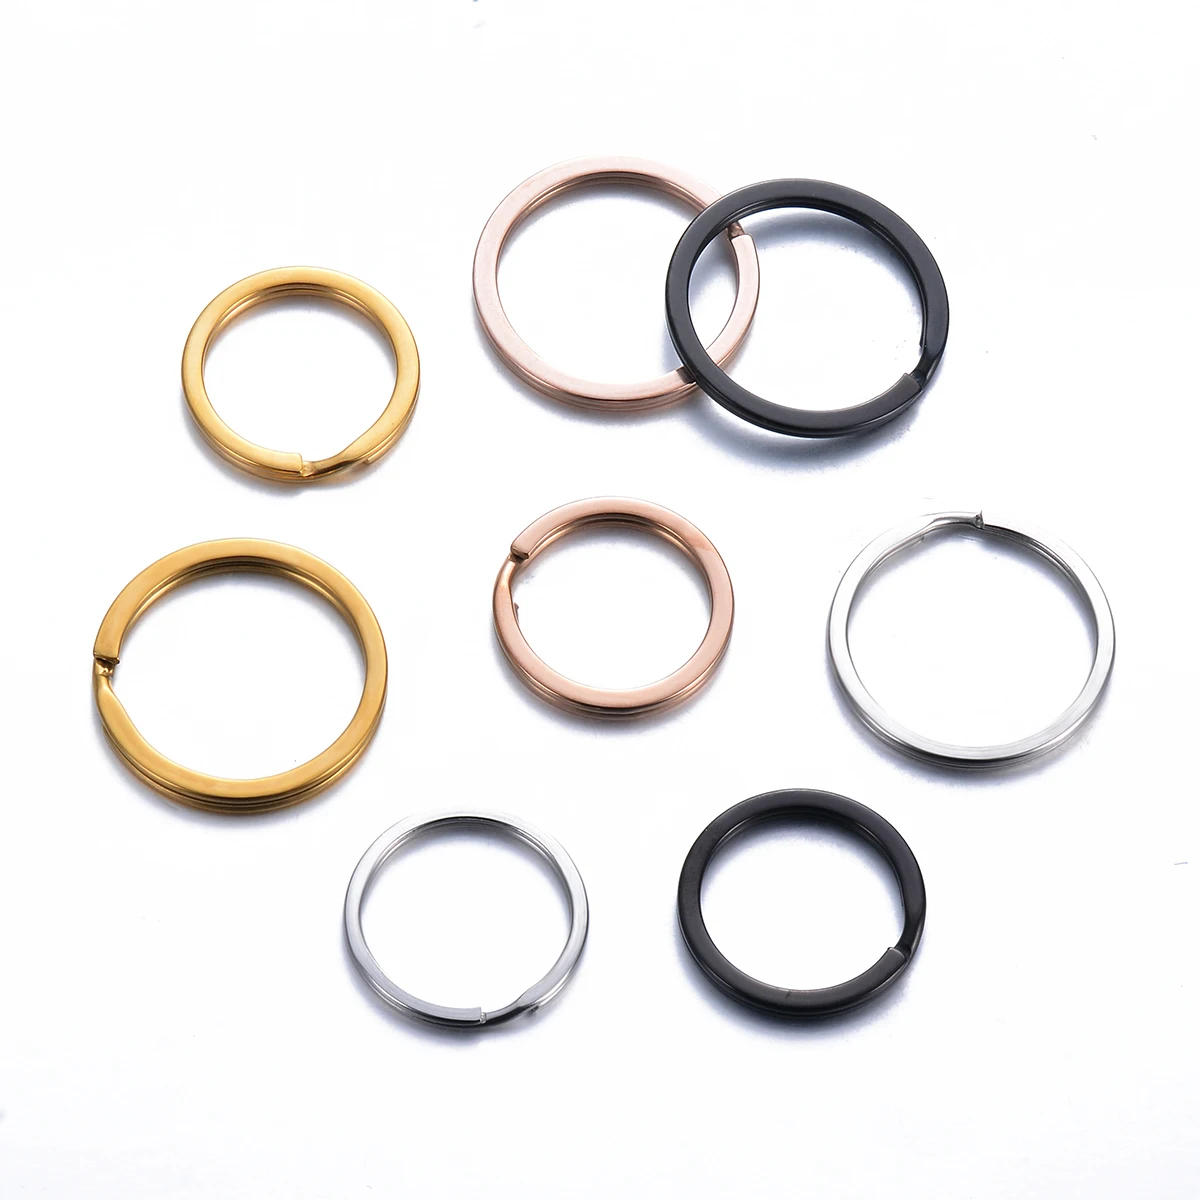 Silver Stainless Steel Flat Edged Split Circular Stainless Steel Keychain  Ring Clips 1.2/30mm For Car/Home Keys Organization From Sarah2019, $0.07